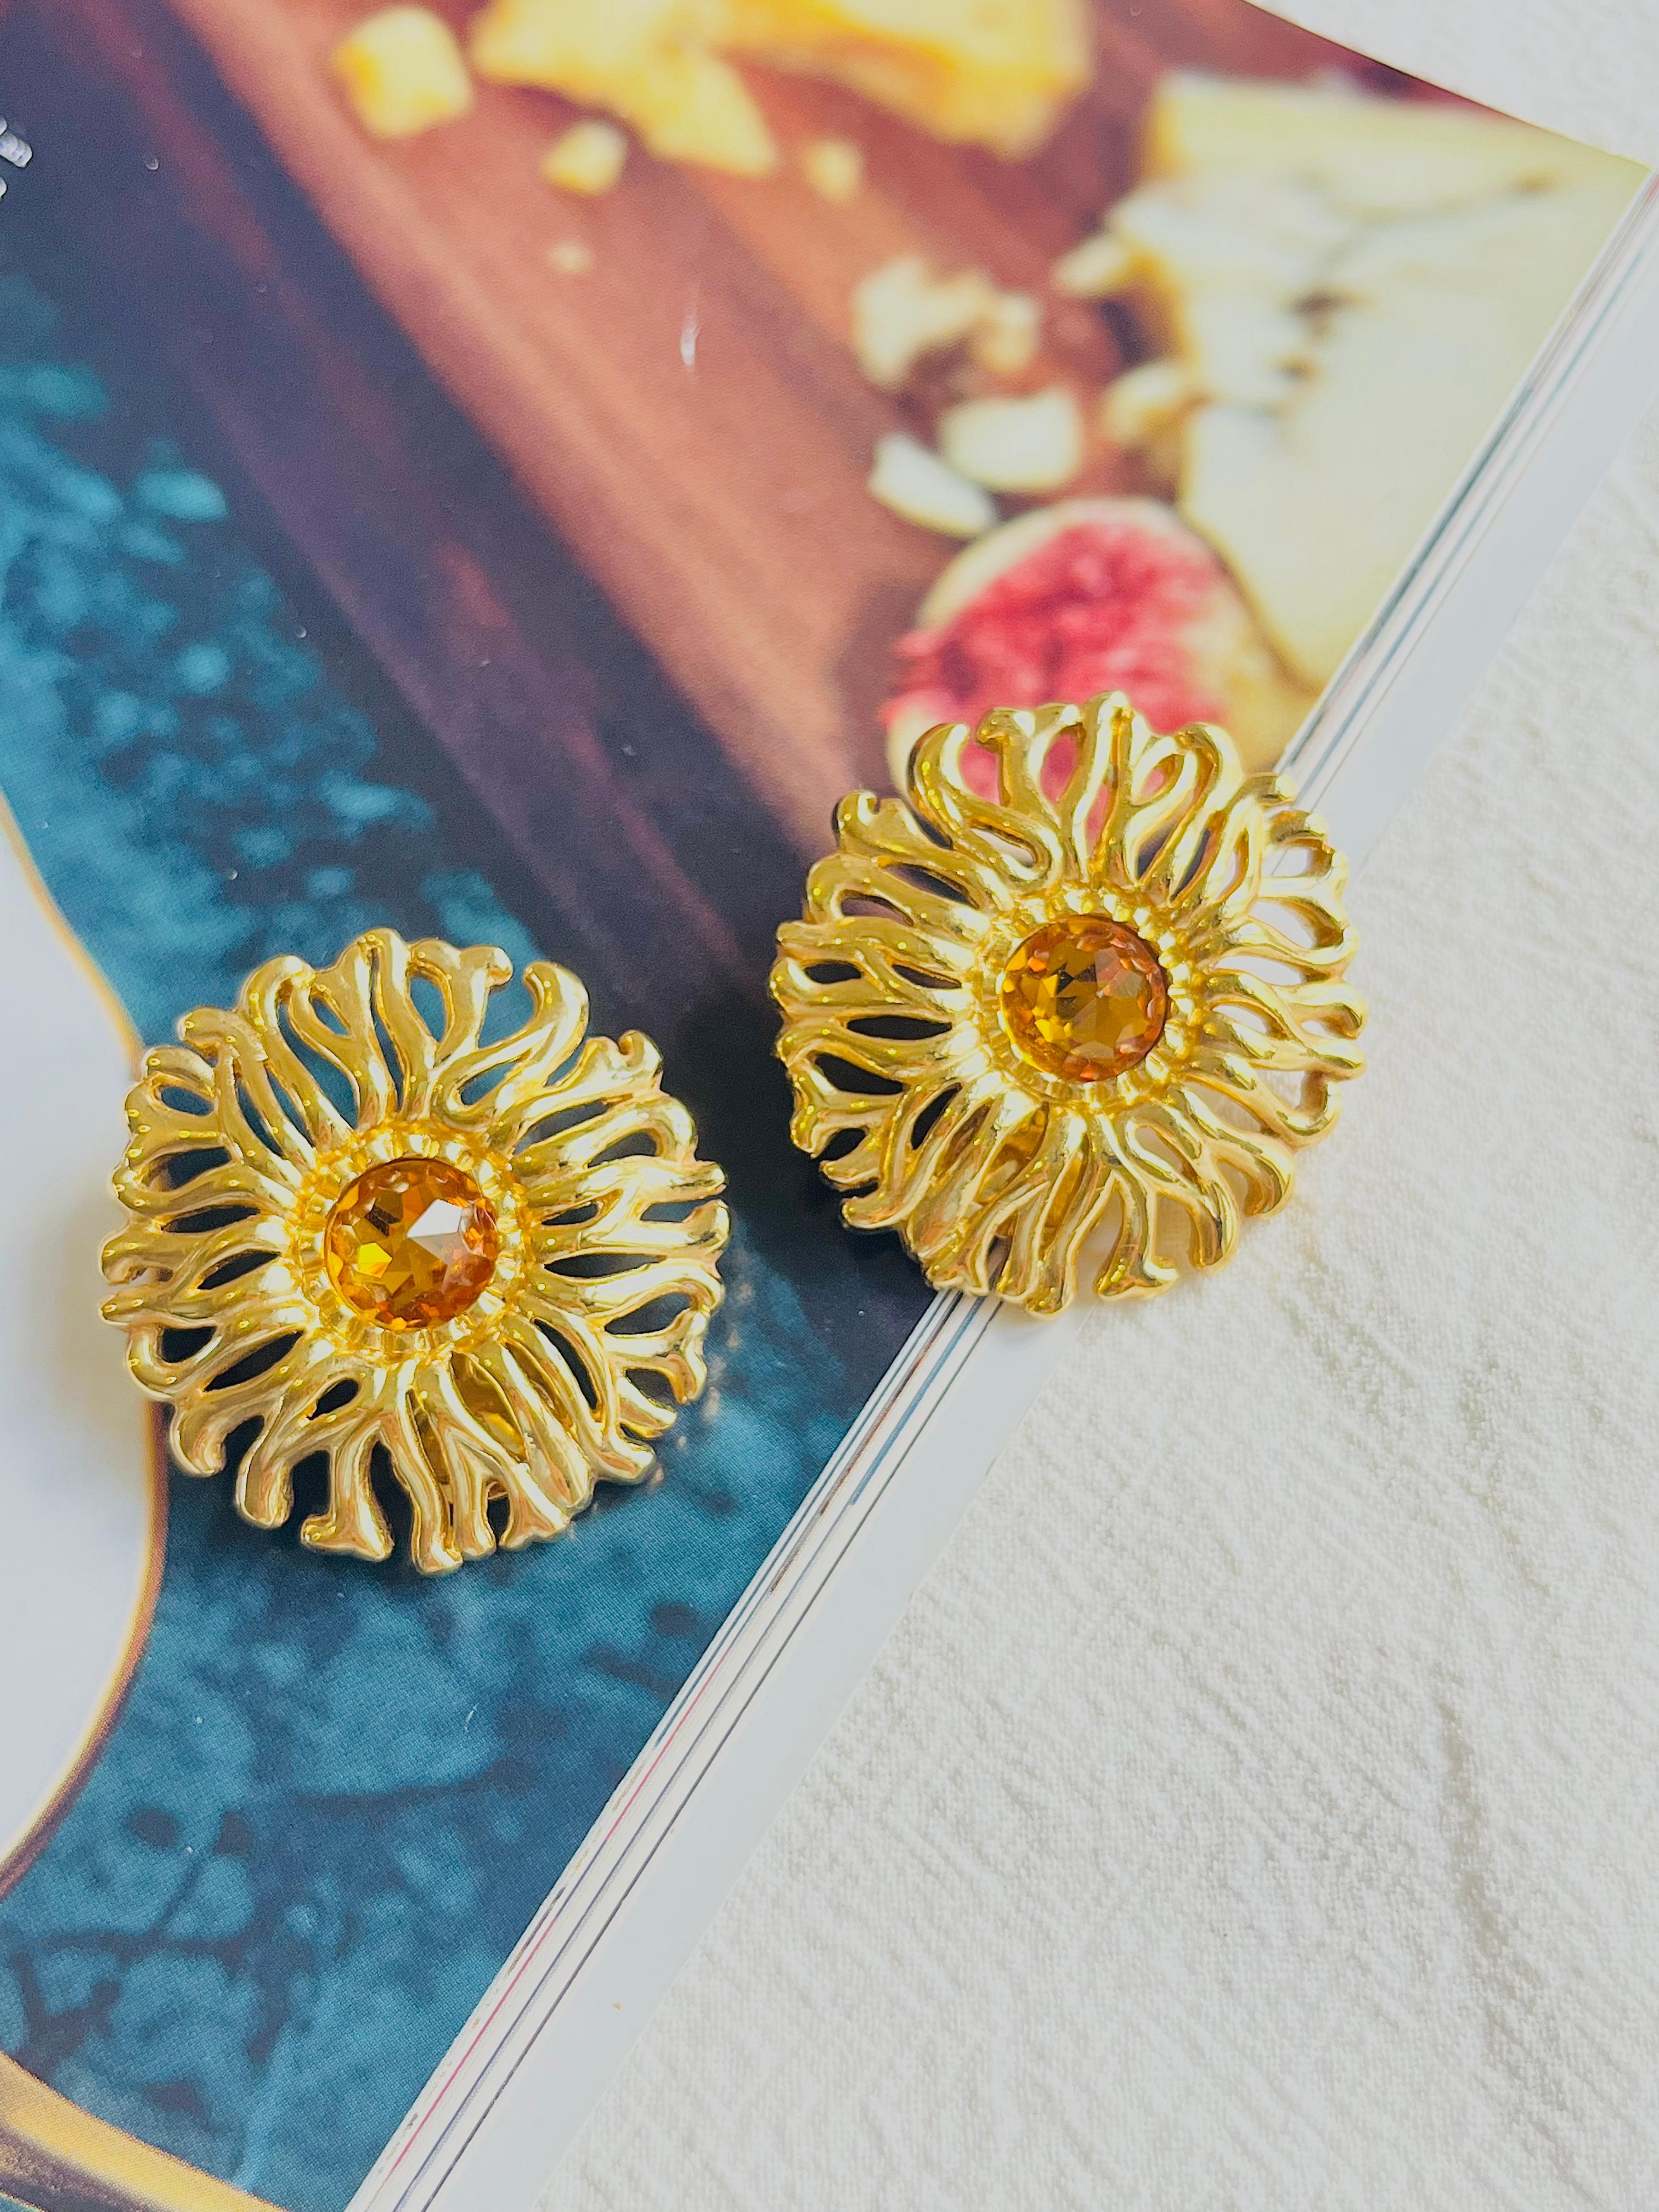 Christian Dior 1980s Vintage Extra Large Yellow Crystal Openwork Round Sunflower Chunky Clip Earrings, Gold Tone

Very excellent condition. 100% Genuine. Vintage and rare to find.

A very beautiful pair of earrings by 